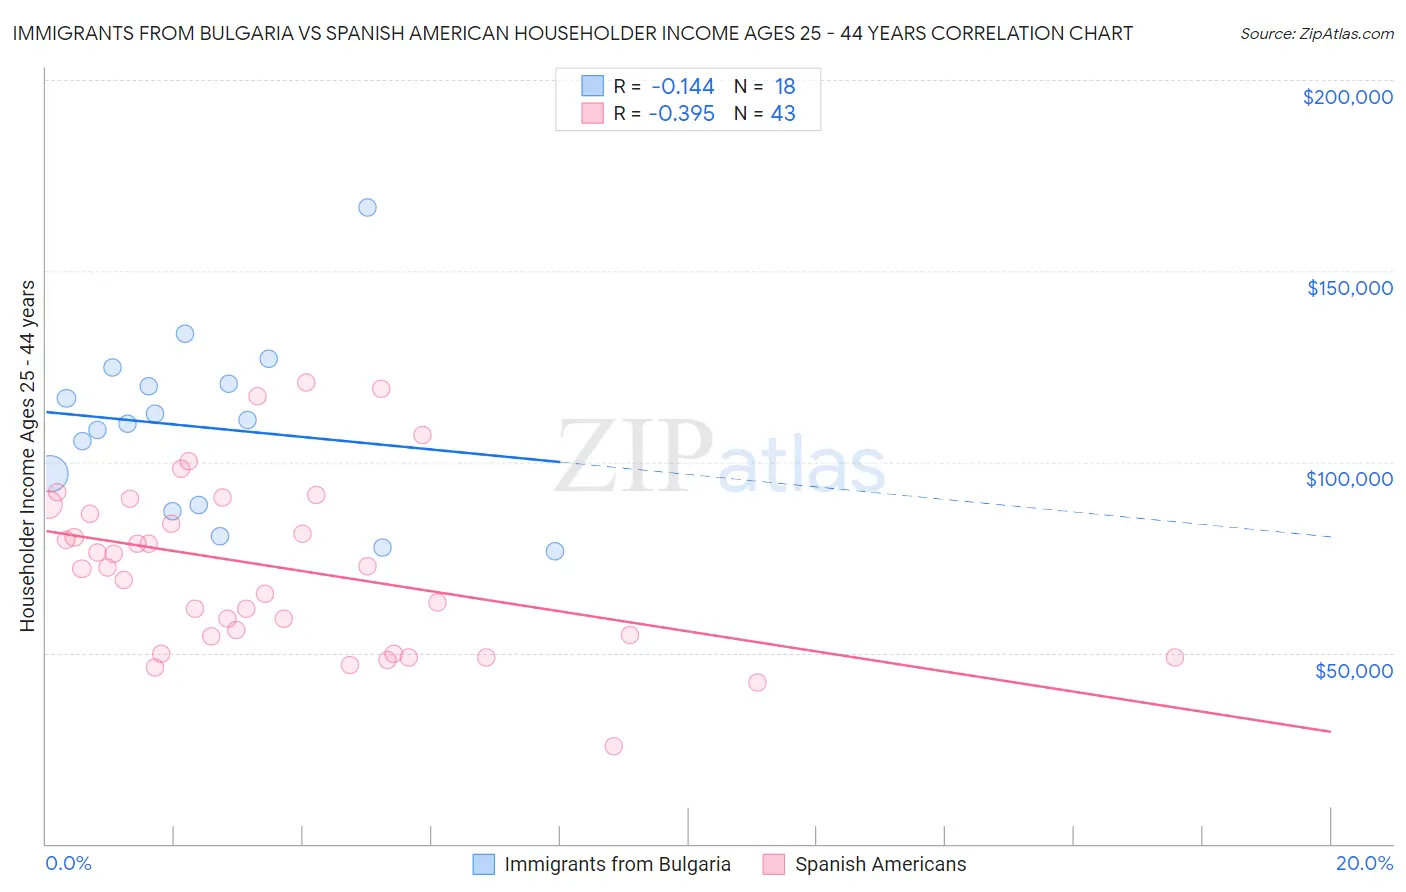 Immigrants from Bulgaria vs Spanish American Householder Income Ages 25 - 44 years